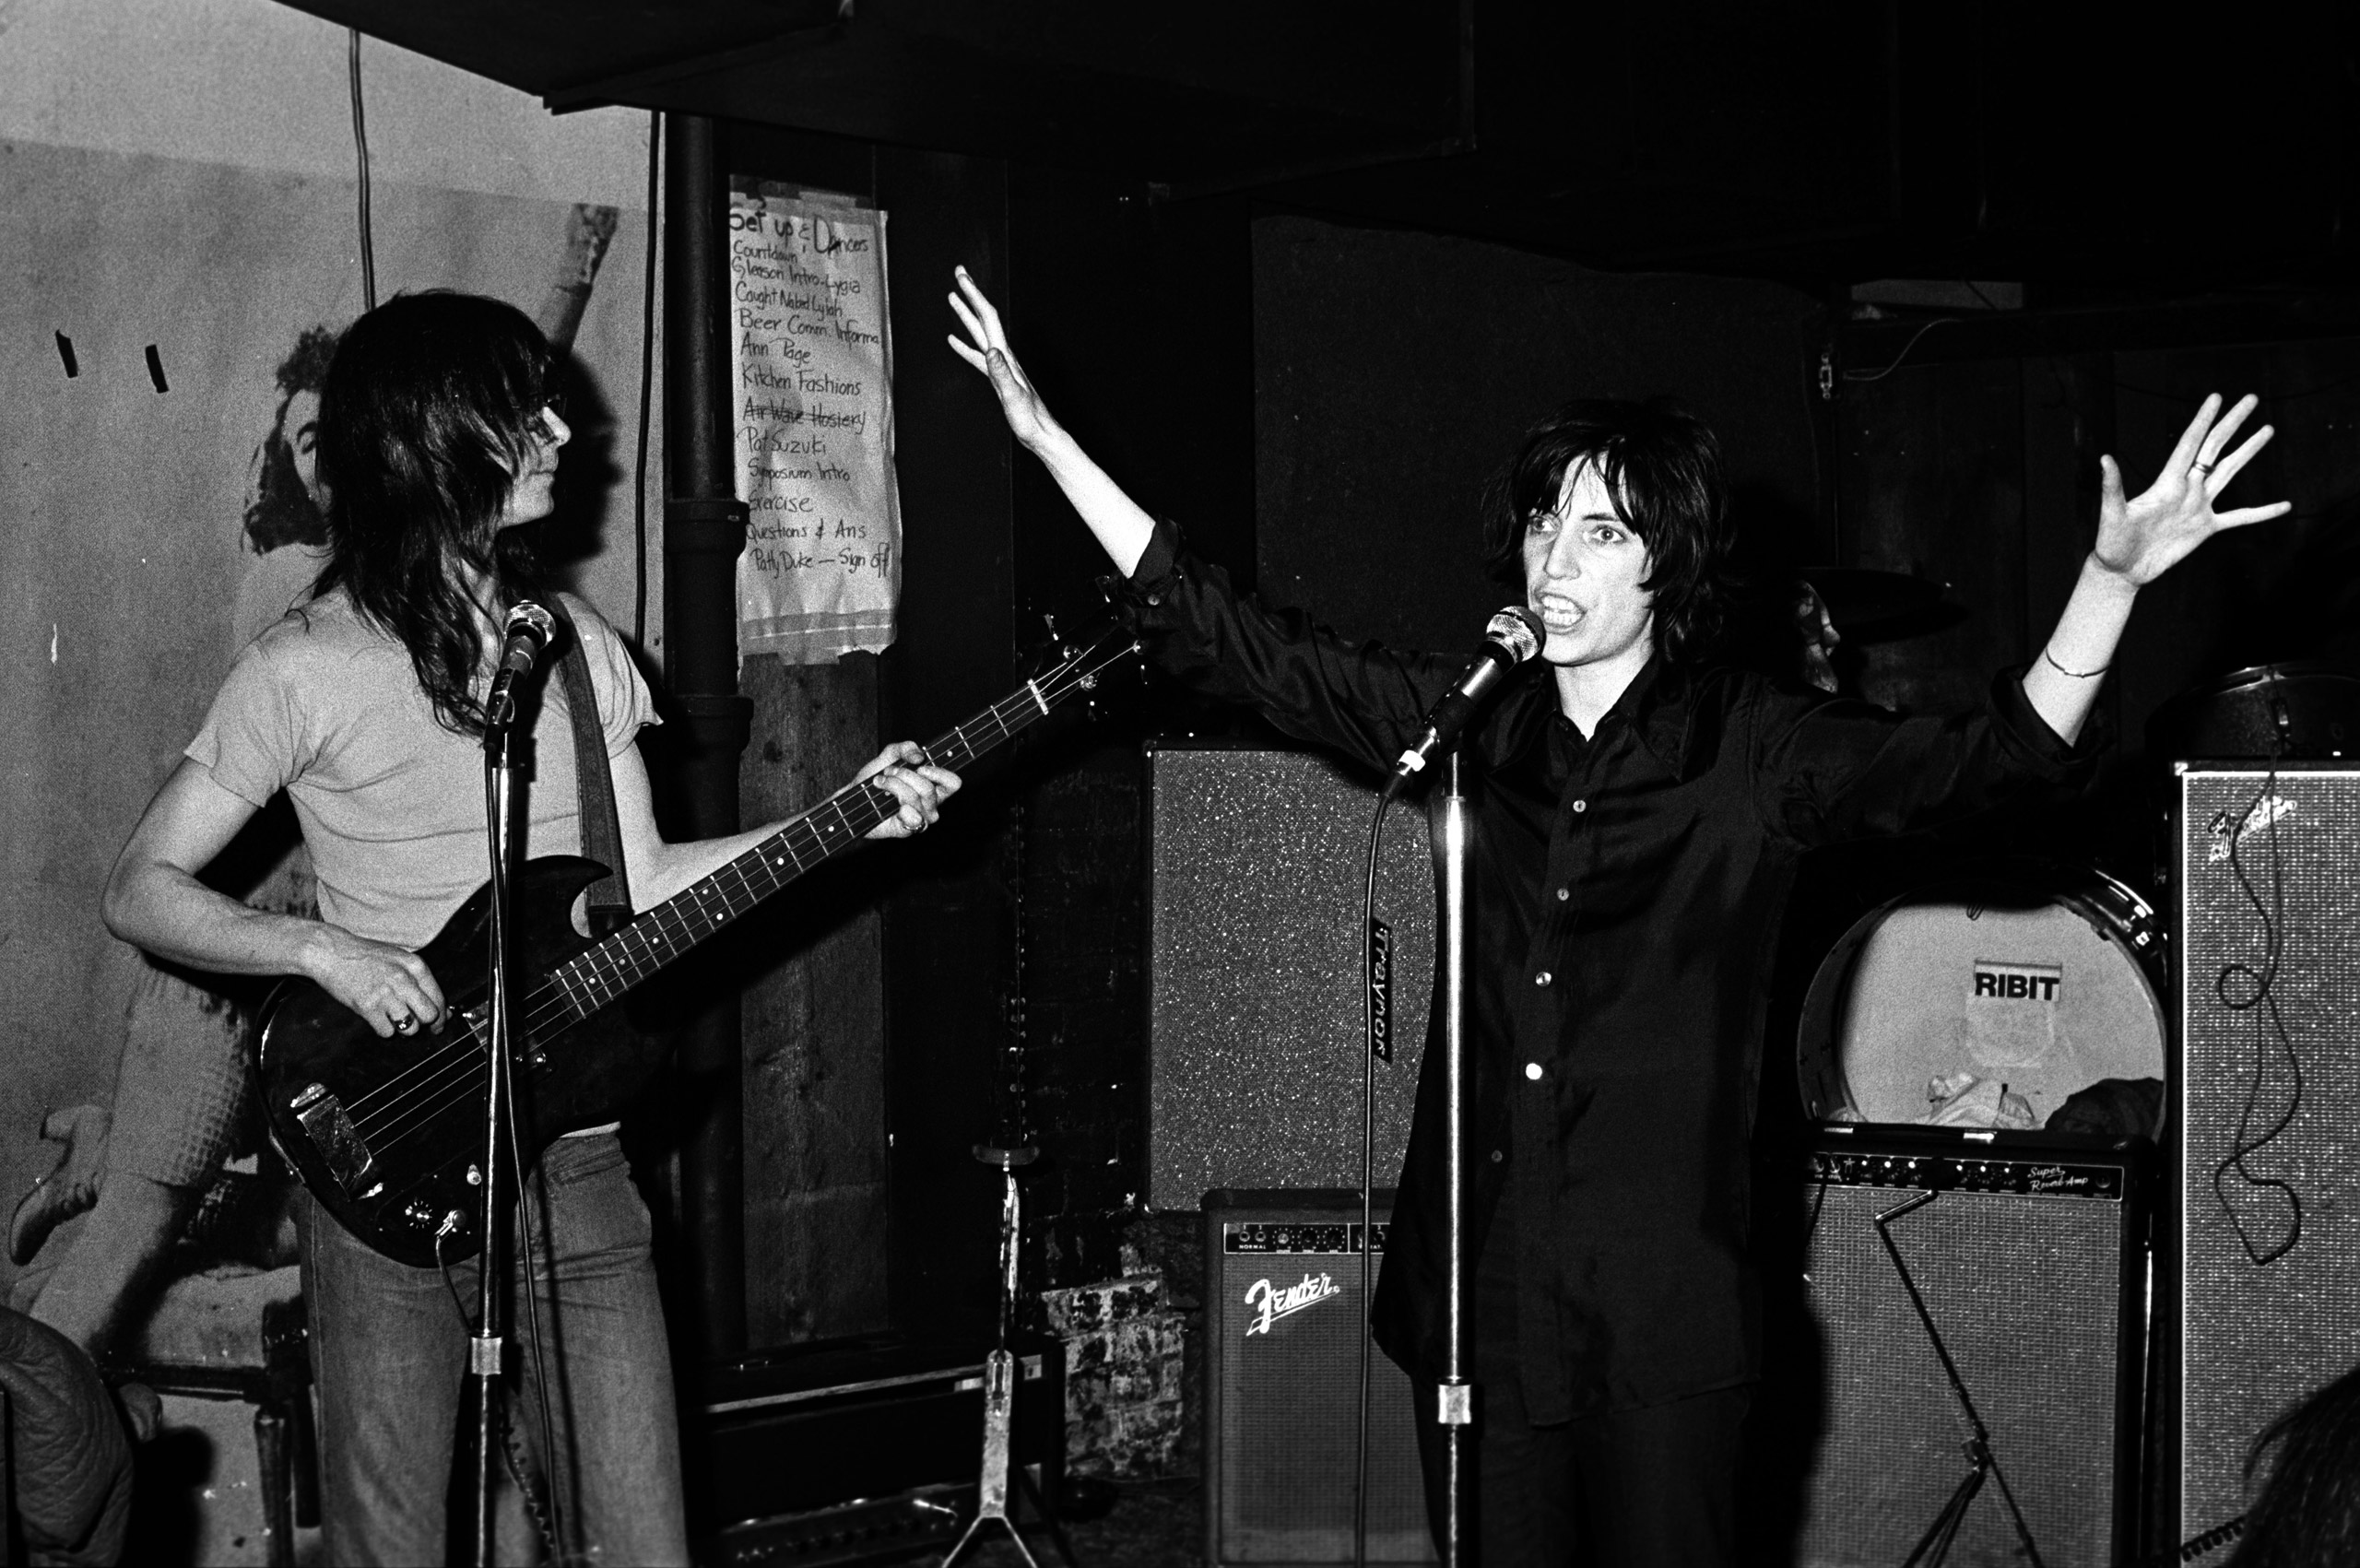 Patti Smith performing with Lenny Kaye at CBGB's club in New York City on April 4 1975.